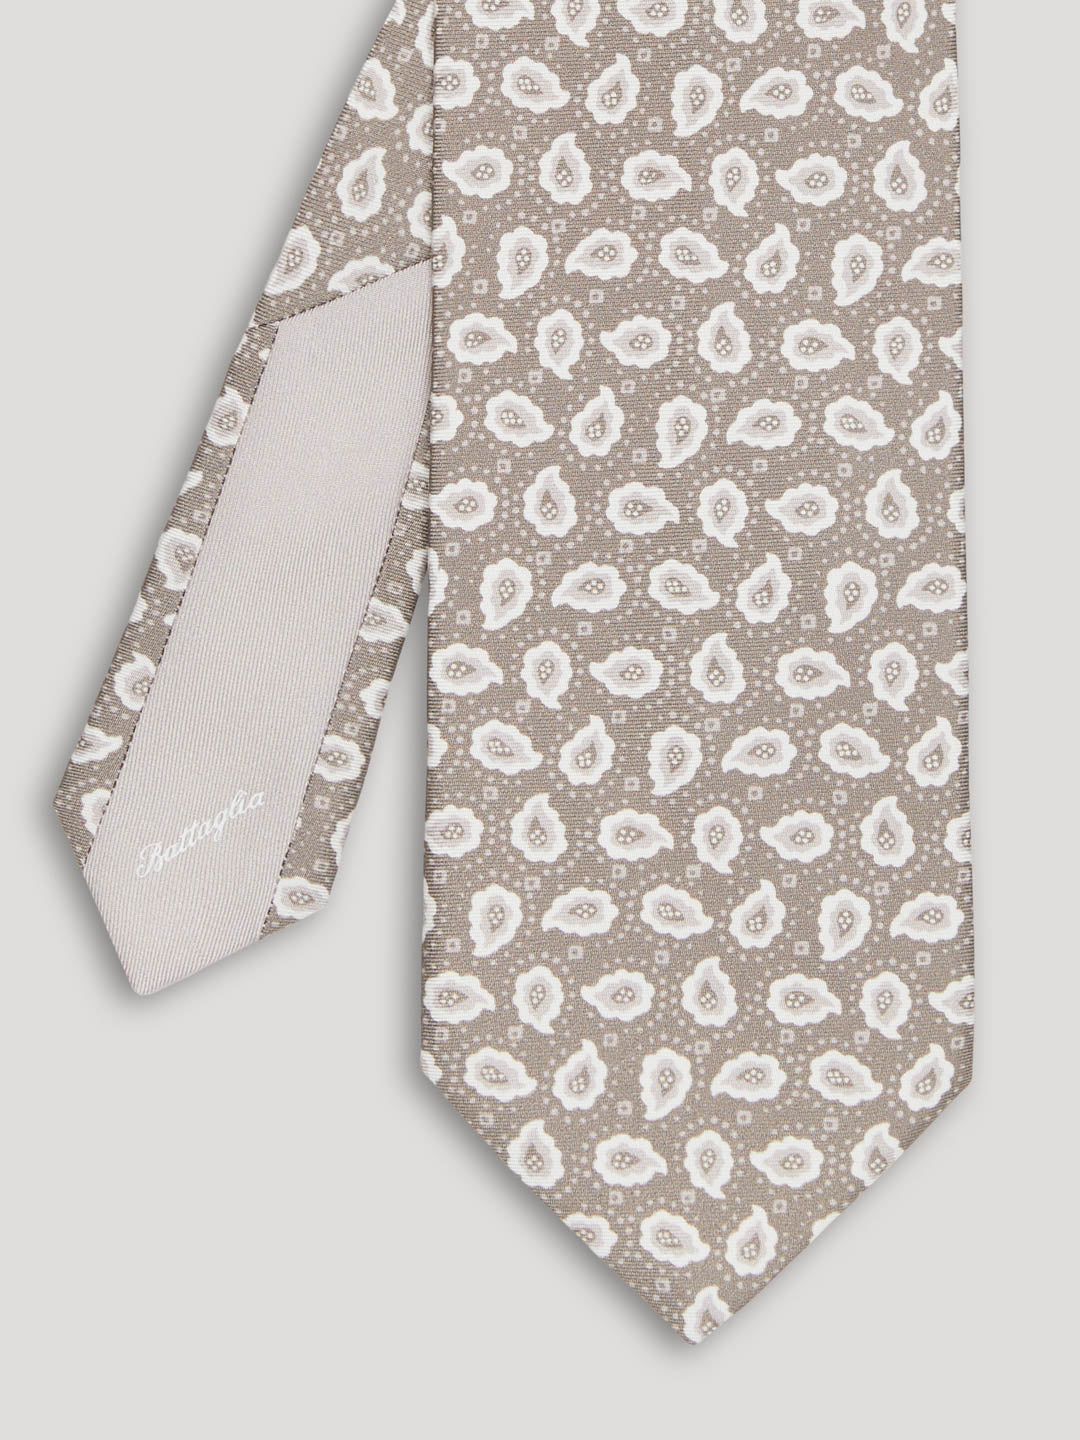 Beige and white paisley tie. 